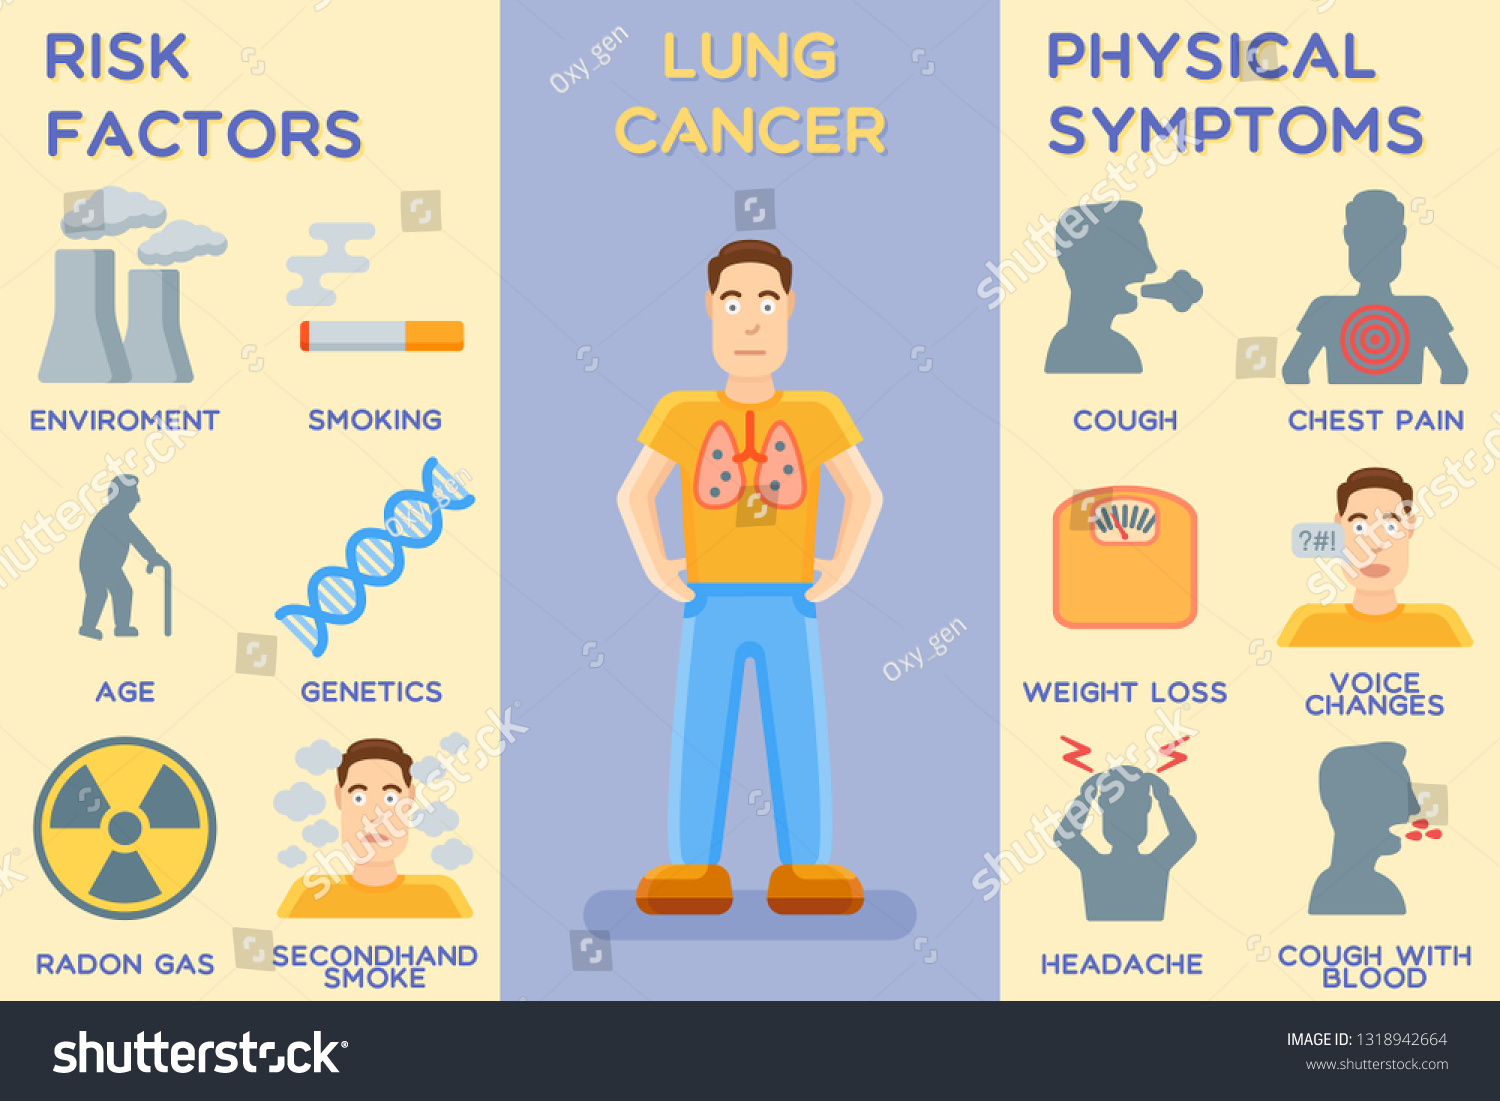 Lung Cancer Risk Factors Symptoms Illness Stock Vector Royalty Free 1318942664